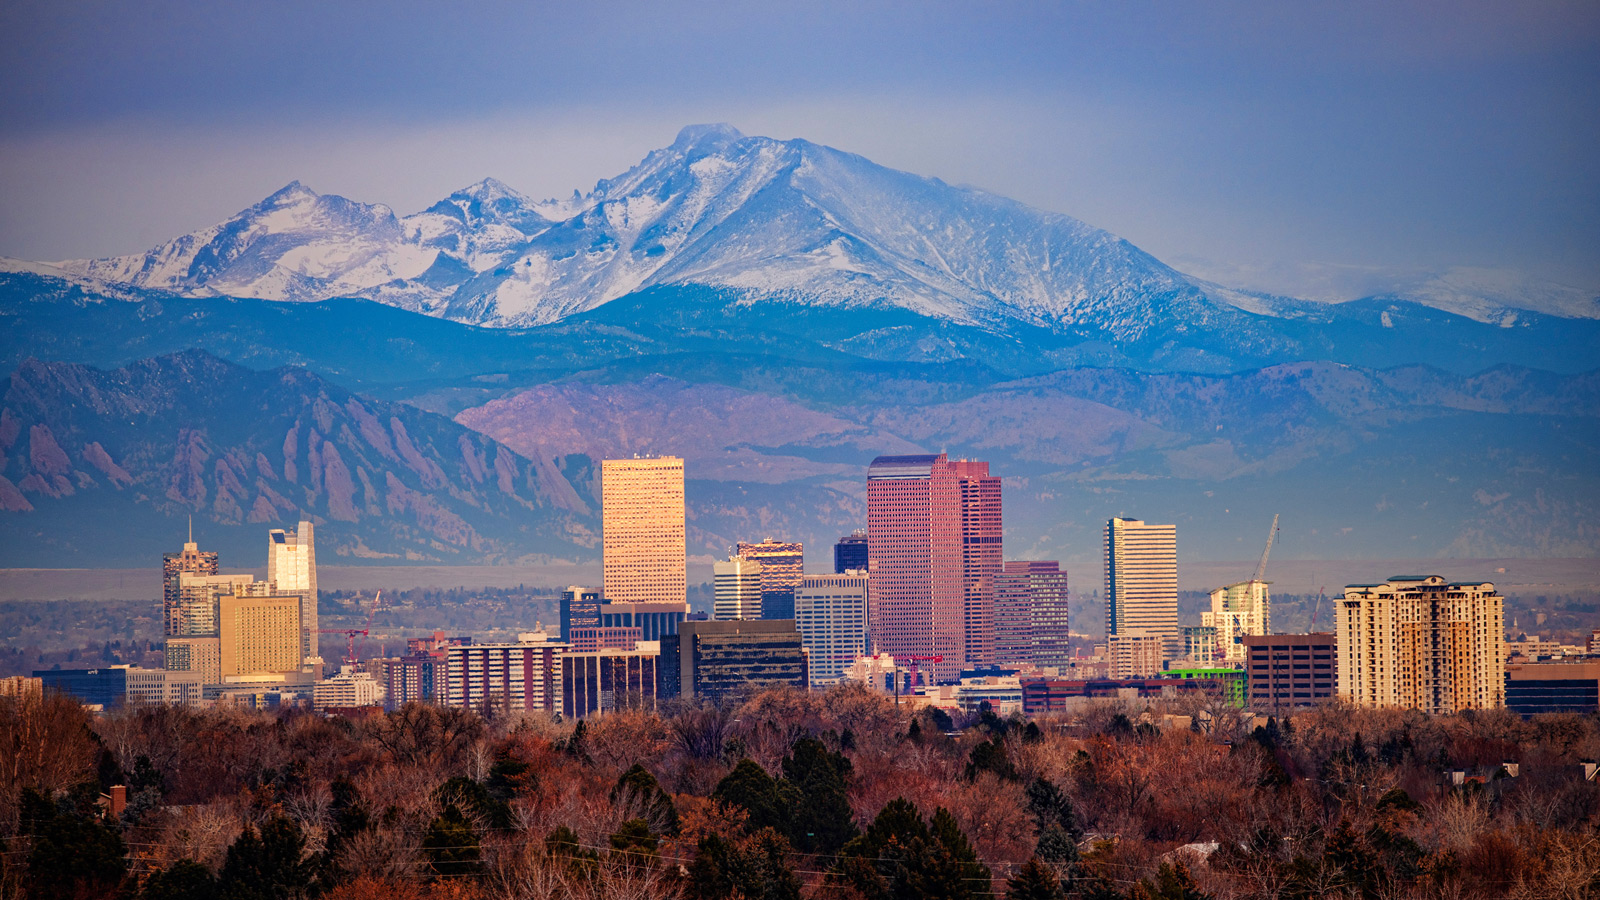 The City and County of Denver moves faster with Workday.